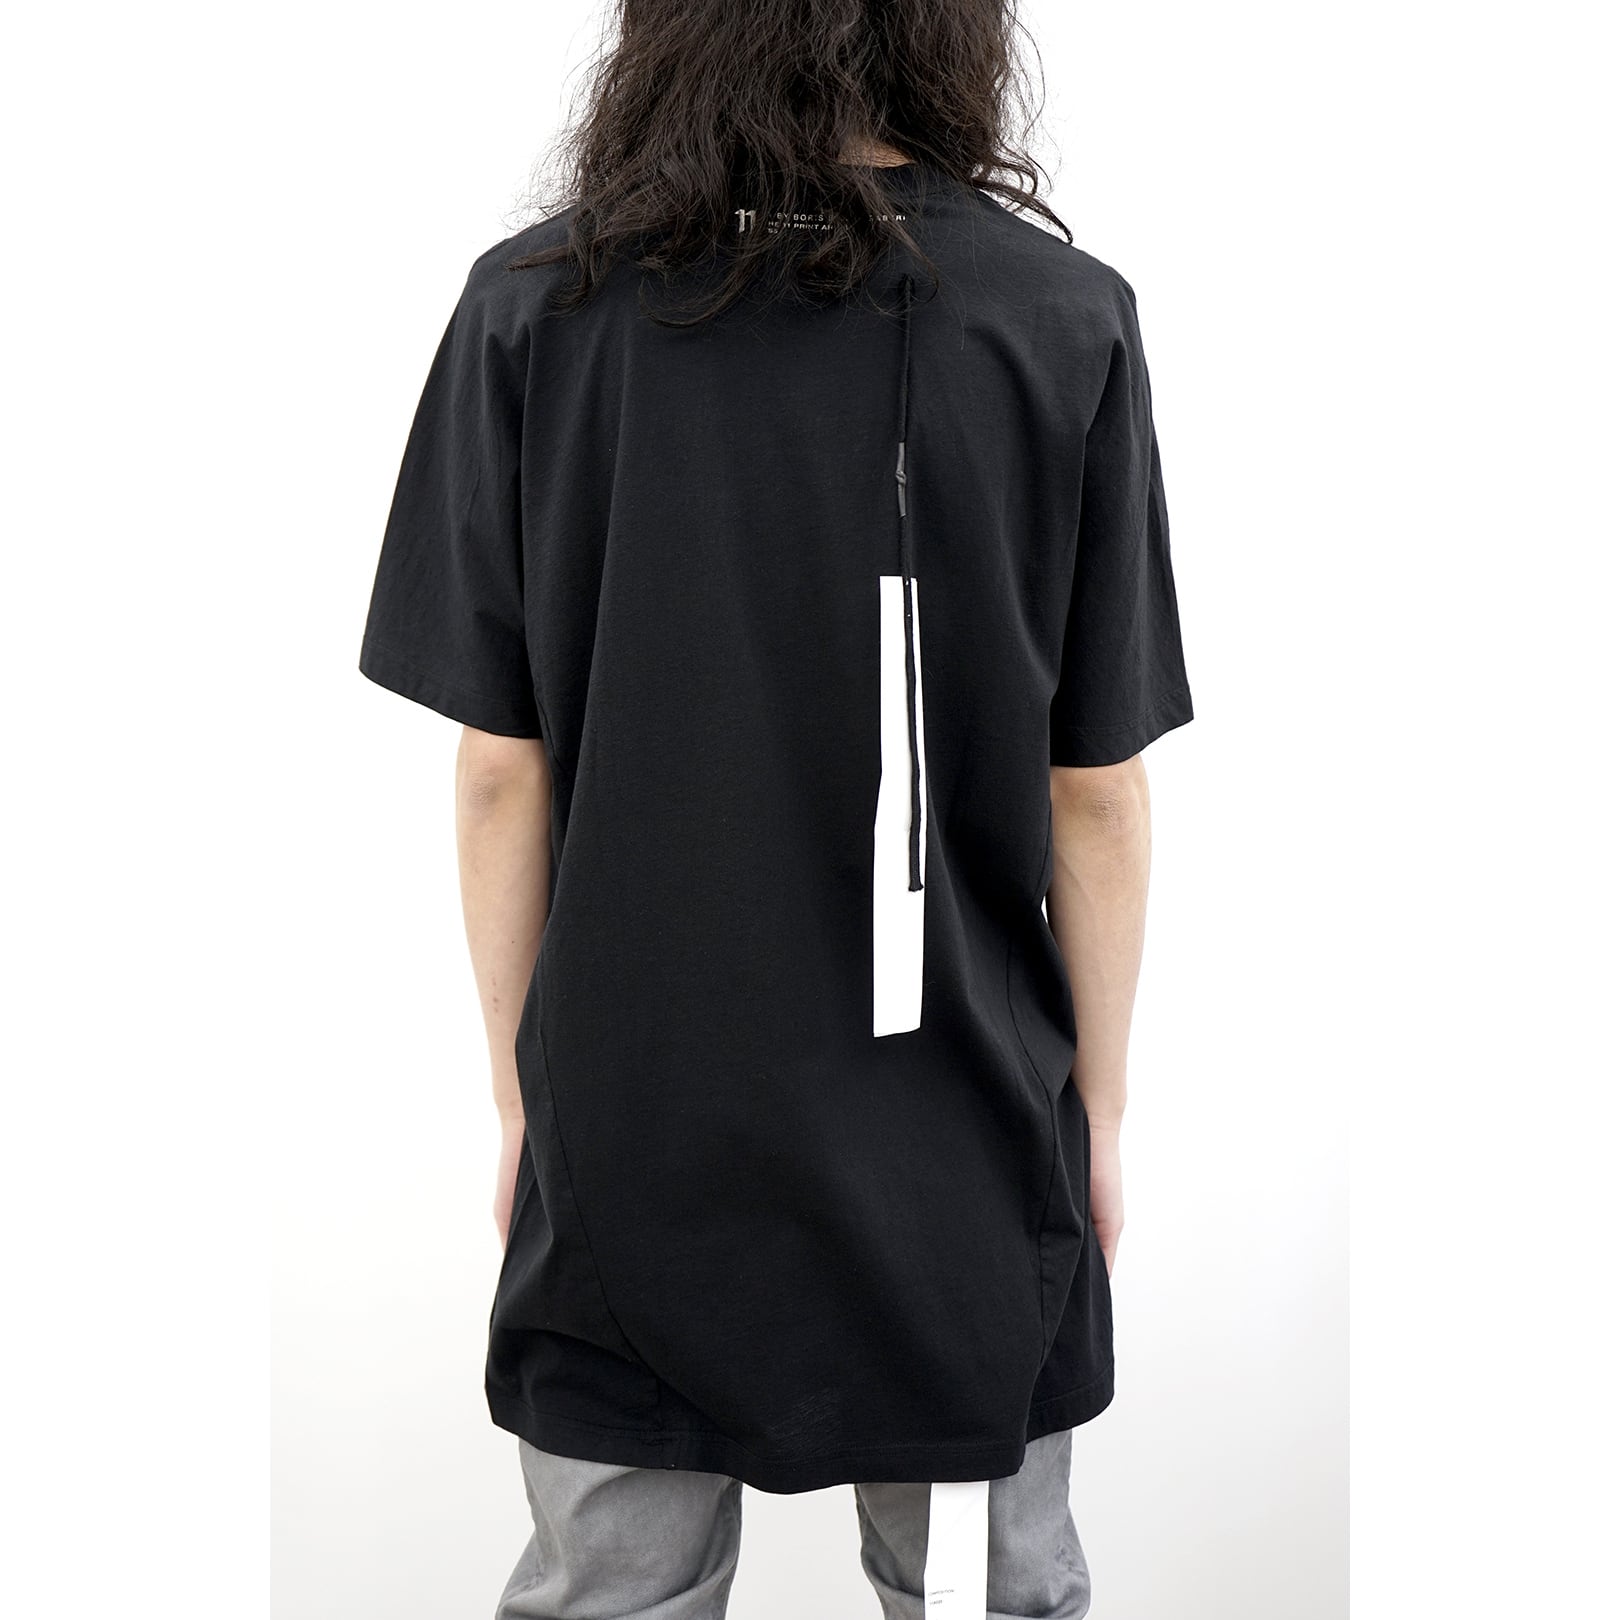 T-shirt　サベリ　メンズ　ビジャン　Piece　BLACK　cotton-jersey　トップス　relaxed-fit　One　ボリス　Tシャツ